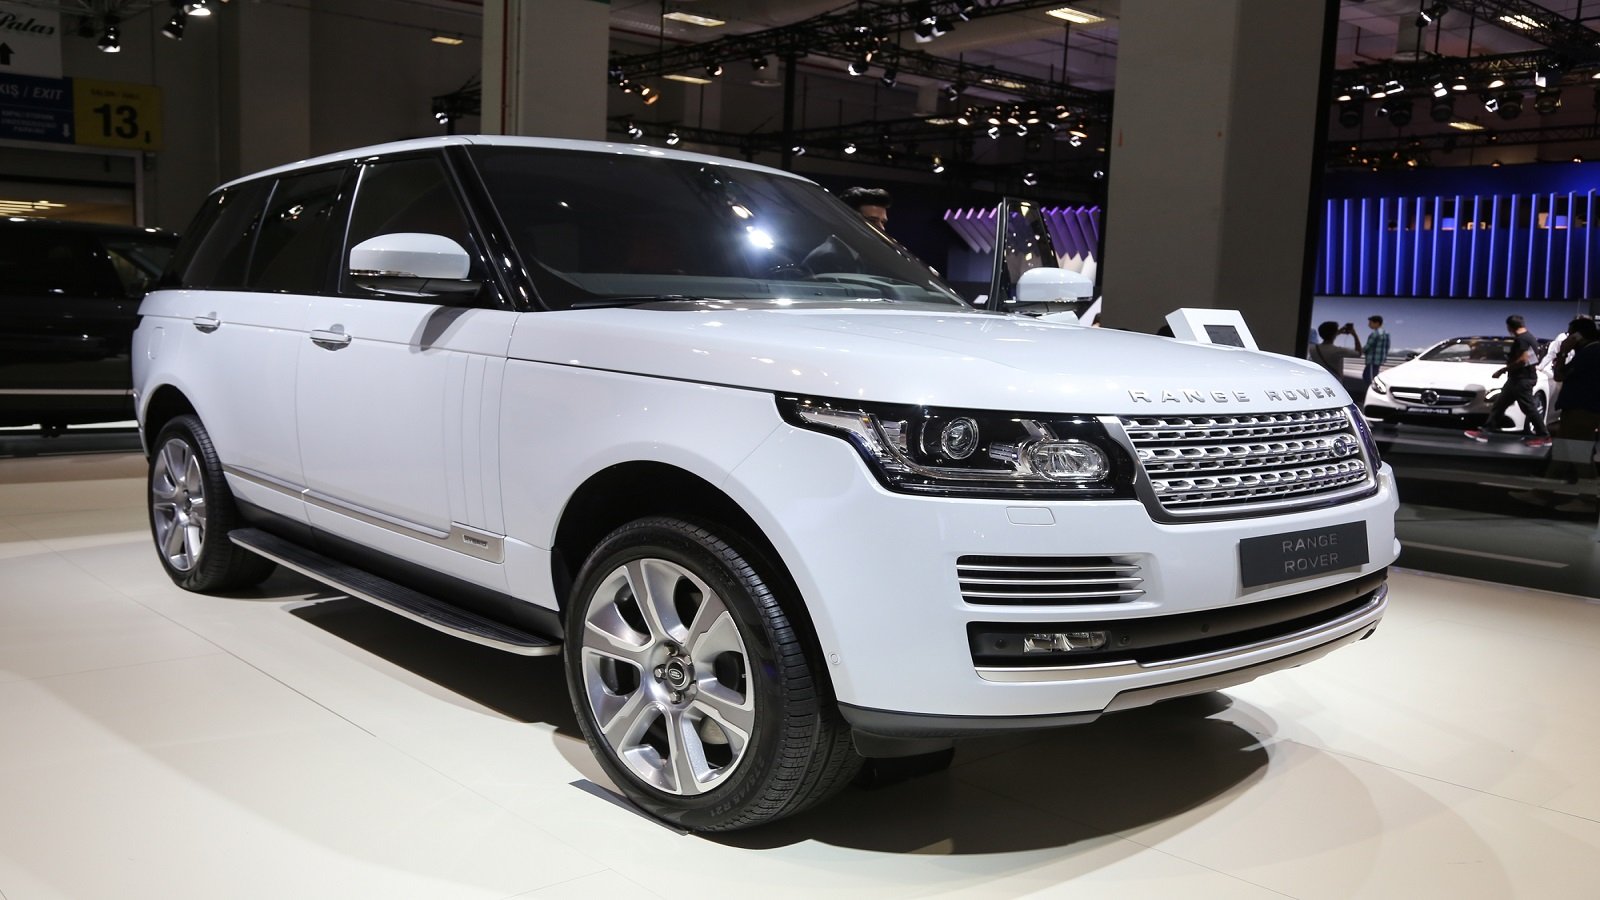 <p>The <strong>Land Rover Range Rover</strong> is a prestigious luxury SUV known for its off-road capabilities and stylish design. Despite its popularity, some owners have reported issues with reliability. In fact, Range <a href="https://www.miramarspeedcircuit.com/range-rover-years-to-avoid/">Rovers have a history of breaking down</a> before reaching 100k miles.</p><p>Common problems include, air suspension failure, electrical issues and transmission malfunctions. These issues often lead to costly repairs and reduced owner satisfaction.</p>